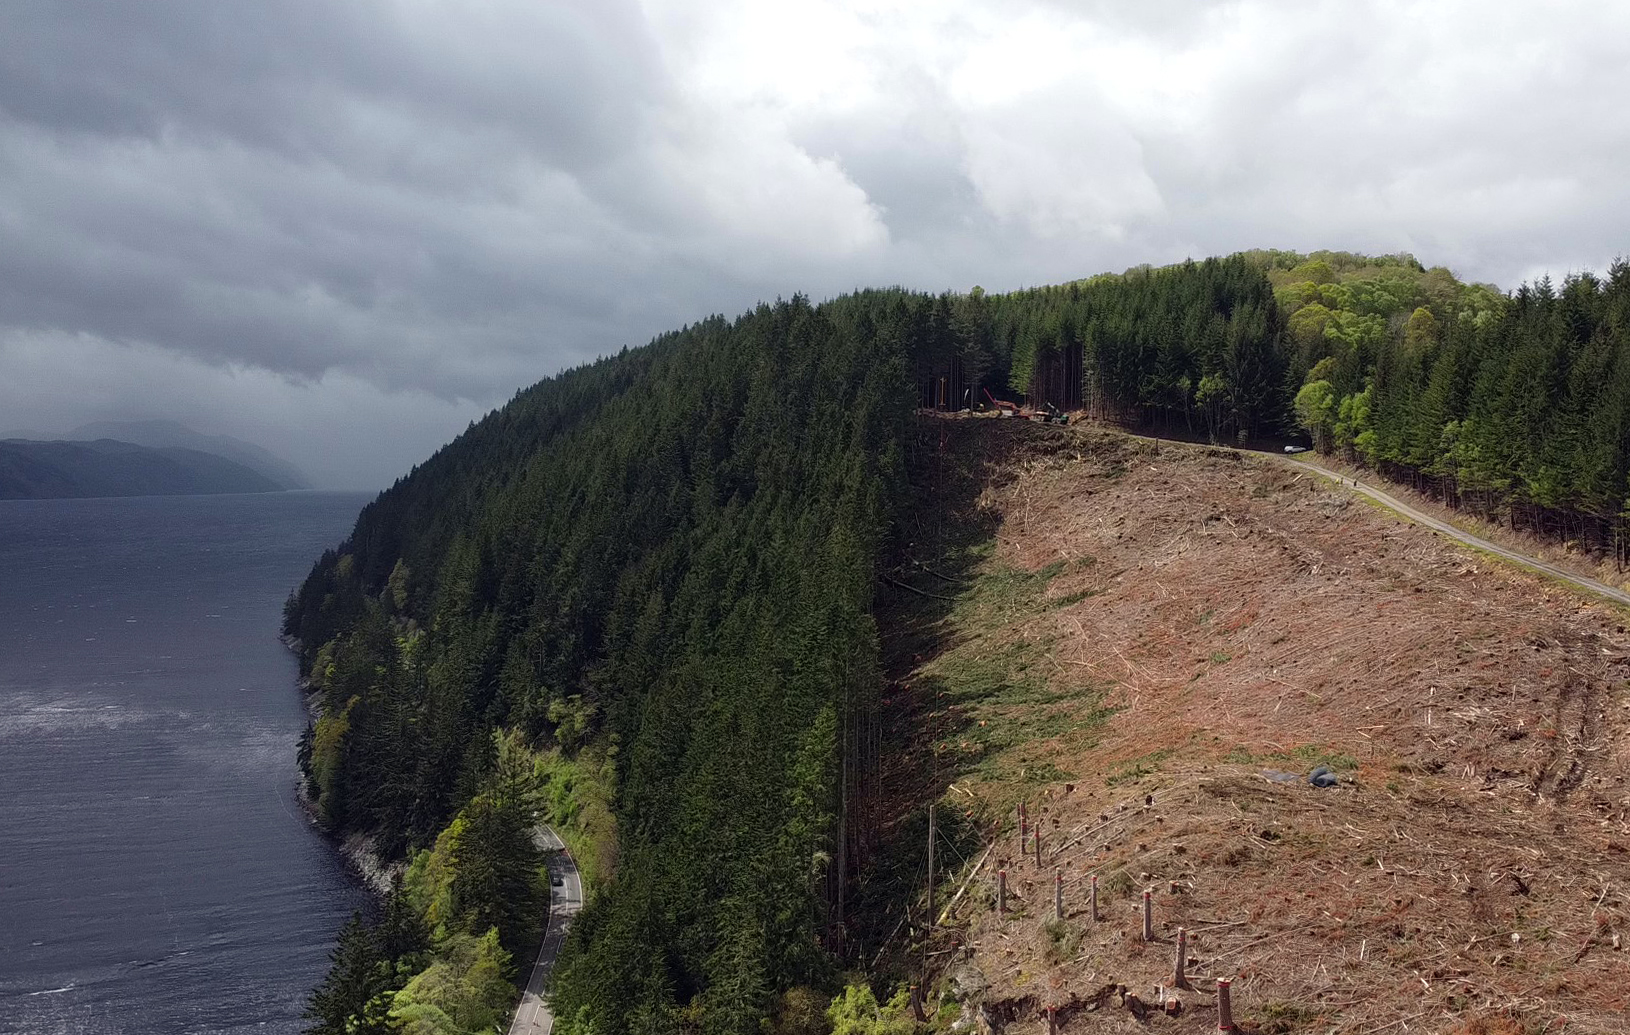 FLS is starting the latest phase of its steep ground felling work along the A82